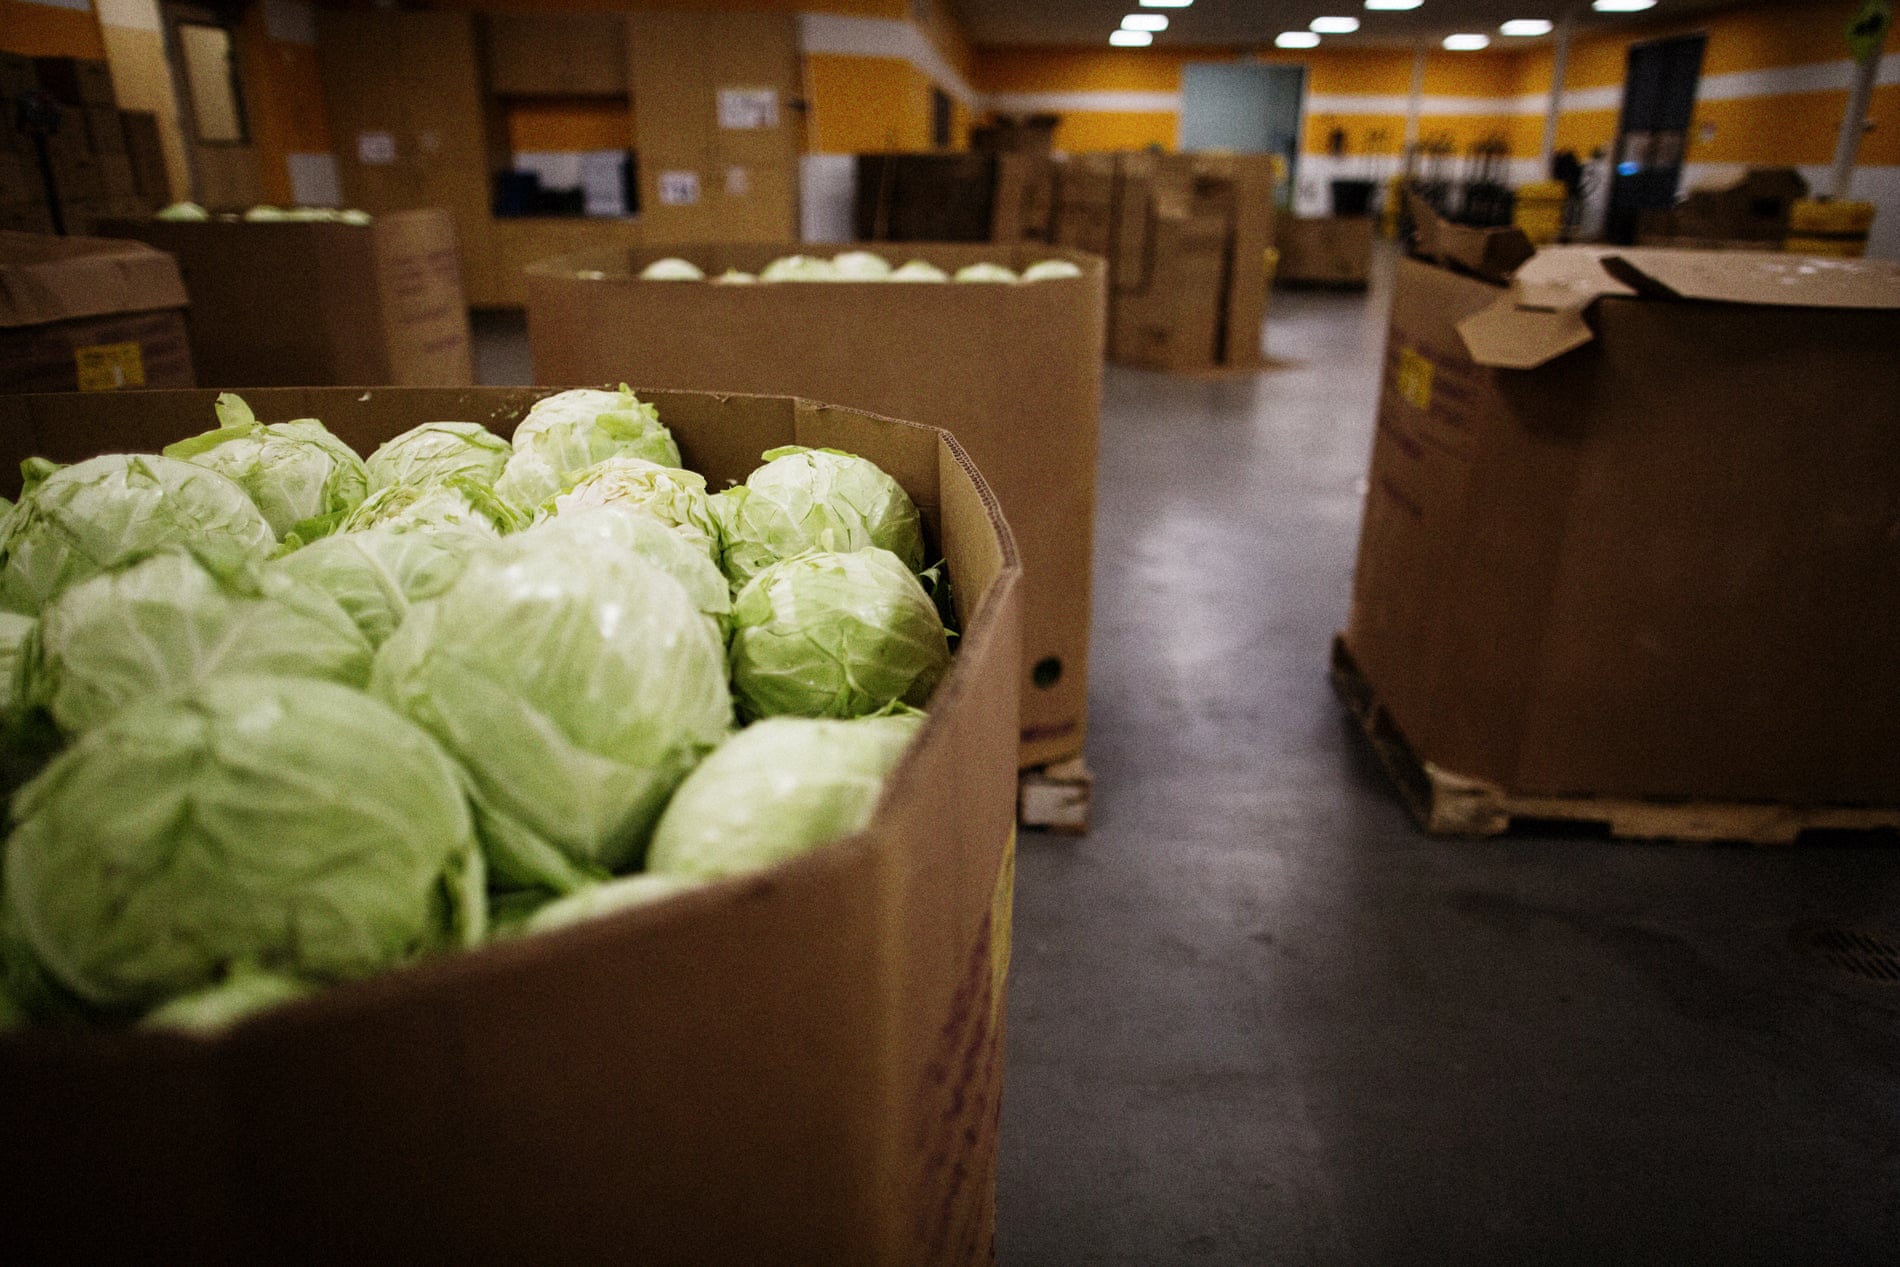 Cabbage ready to be sorted at the Second Harvest Food Bank in San Jose, California.